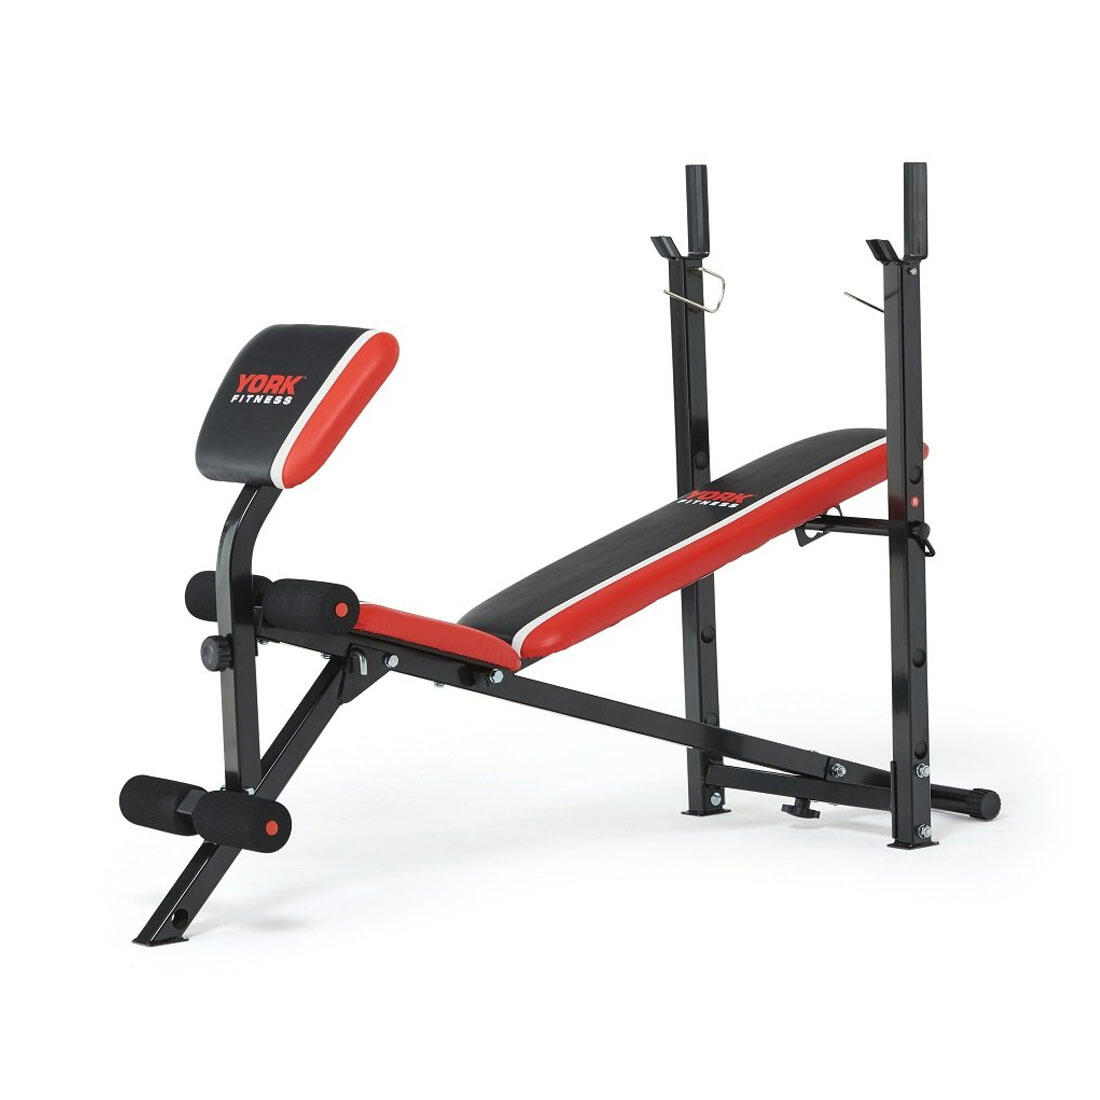 YORK FITNESS York Warrior 2 in 1 Folding Barbell and Ab Bench with Curl